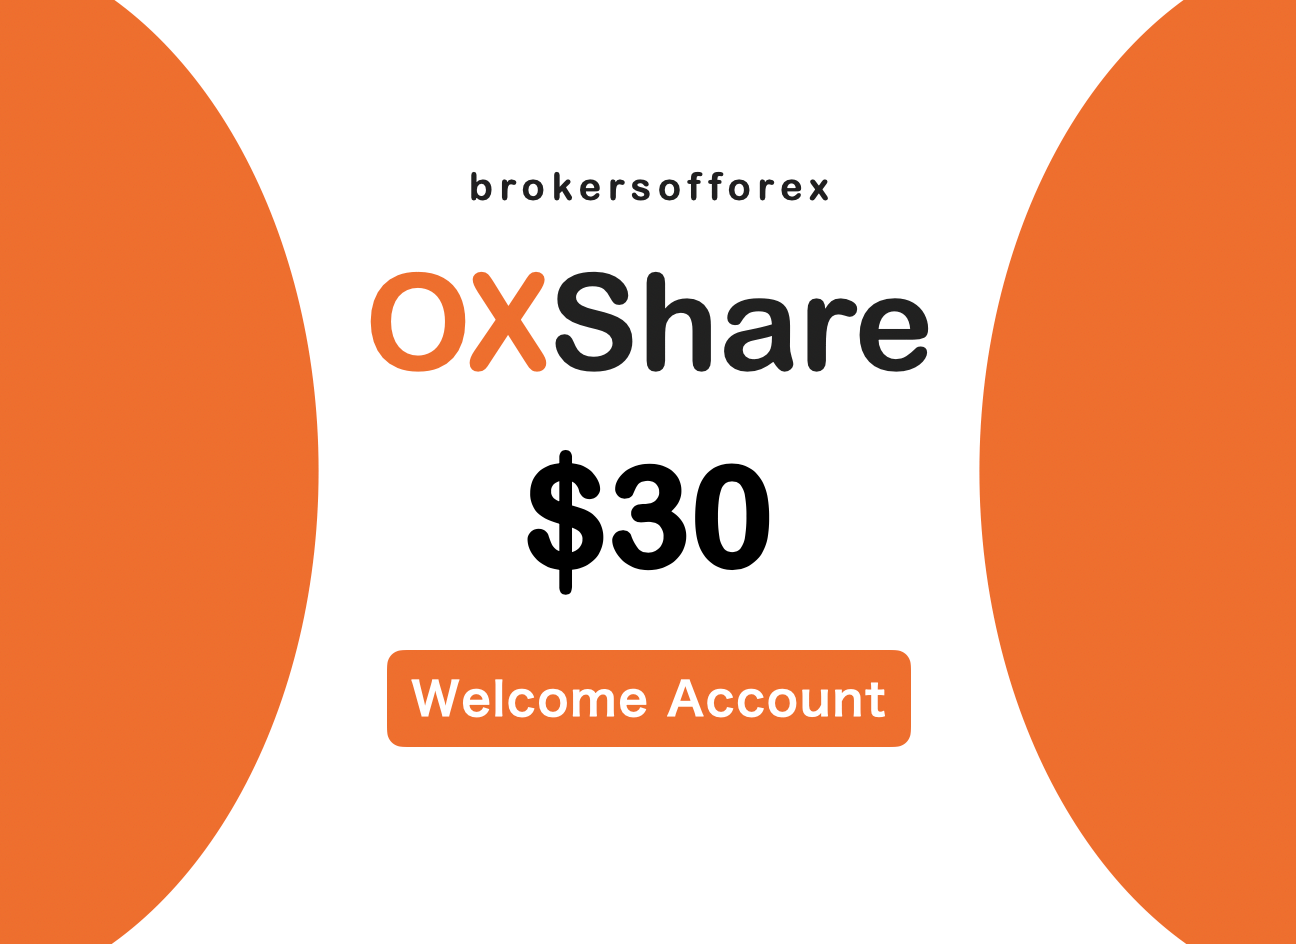 OX Share Welcome Account